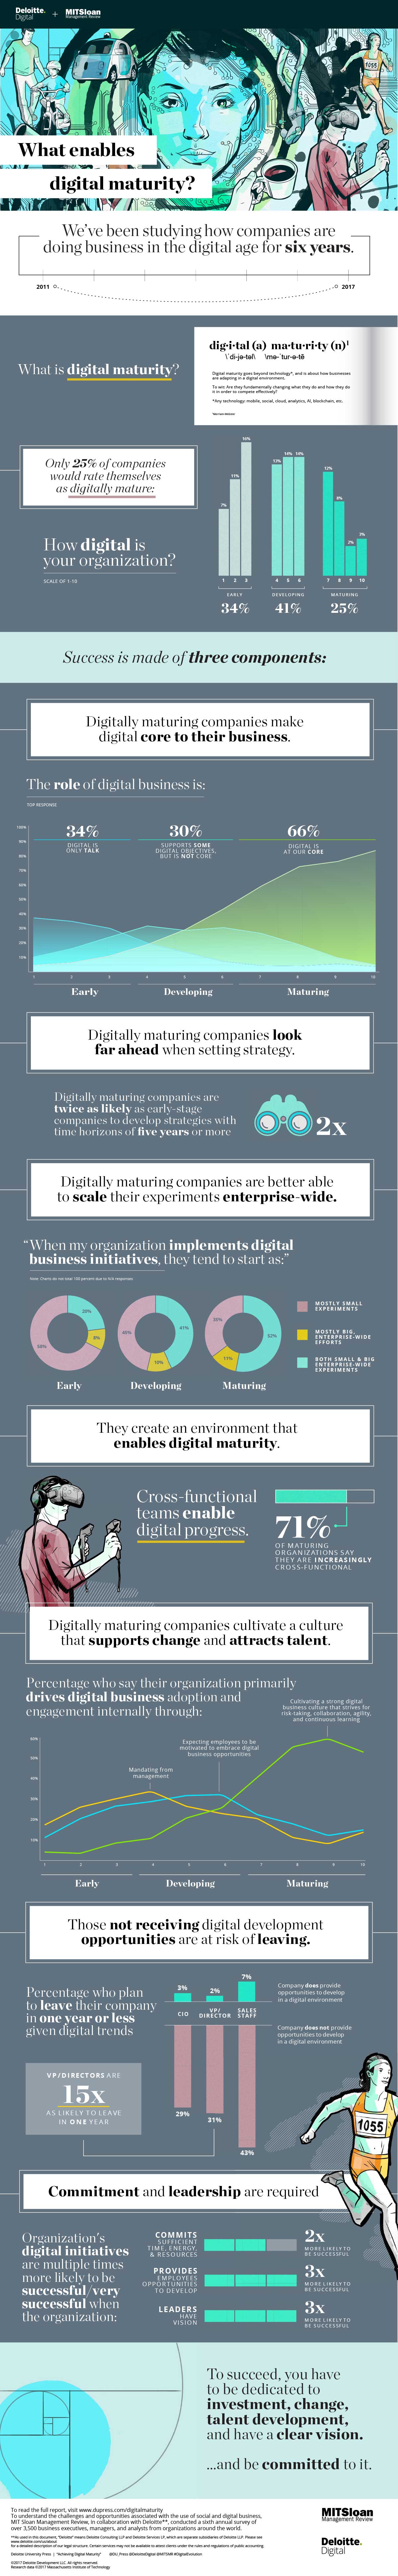 2017 Digital Business Report Infographic